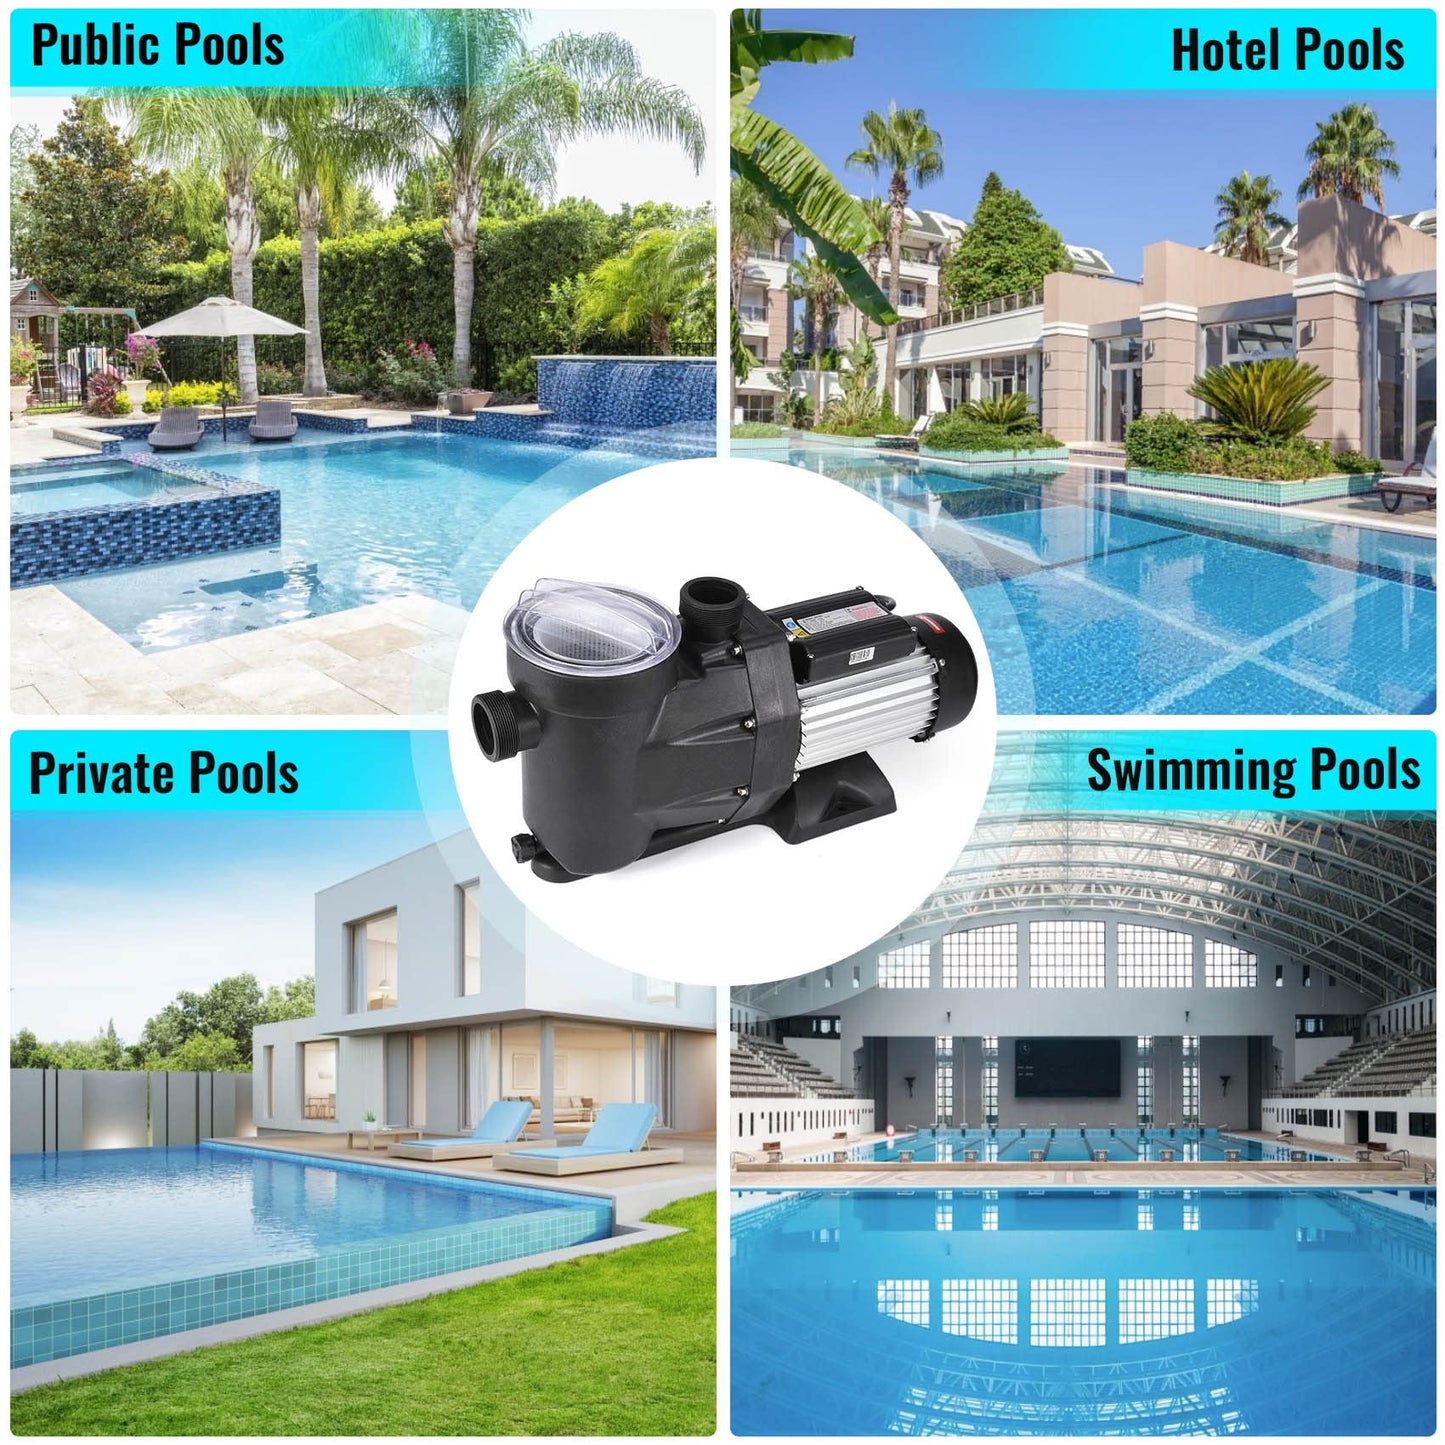 Seeutek 2.5 HP Pool Pump for Above Ground Pool,8880 GPH 1850W Powerful Above Ground Pool Pumps with Strainer Basket. 2.5HP